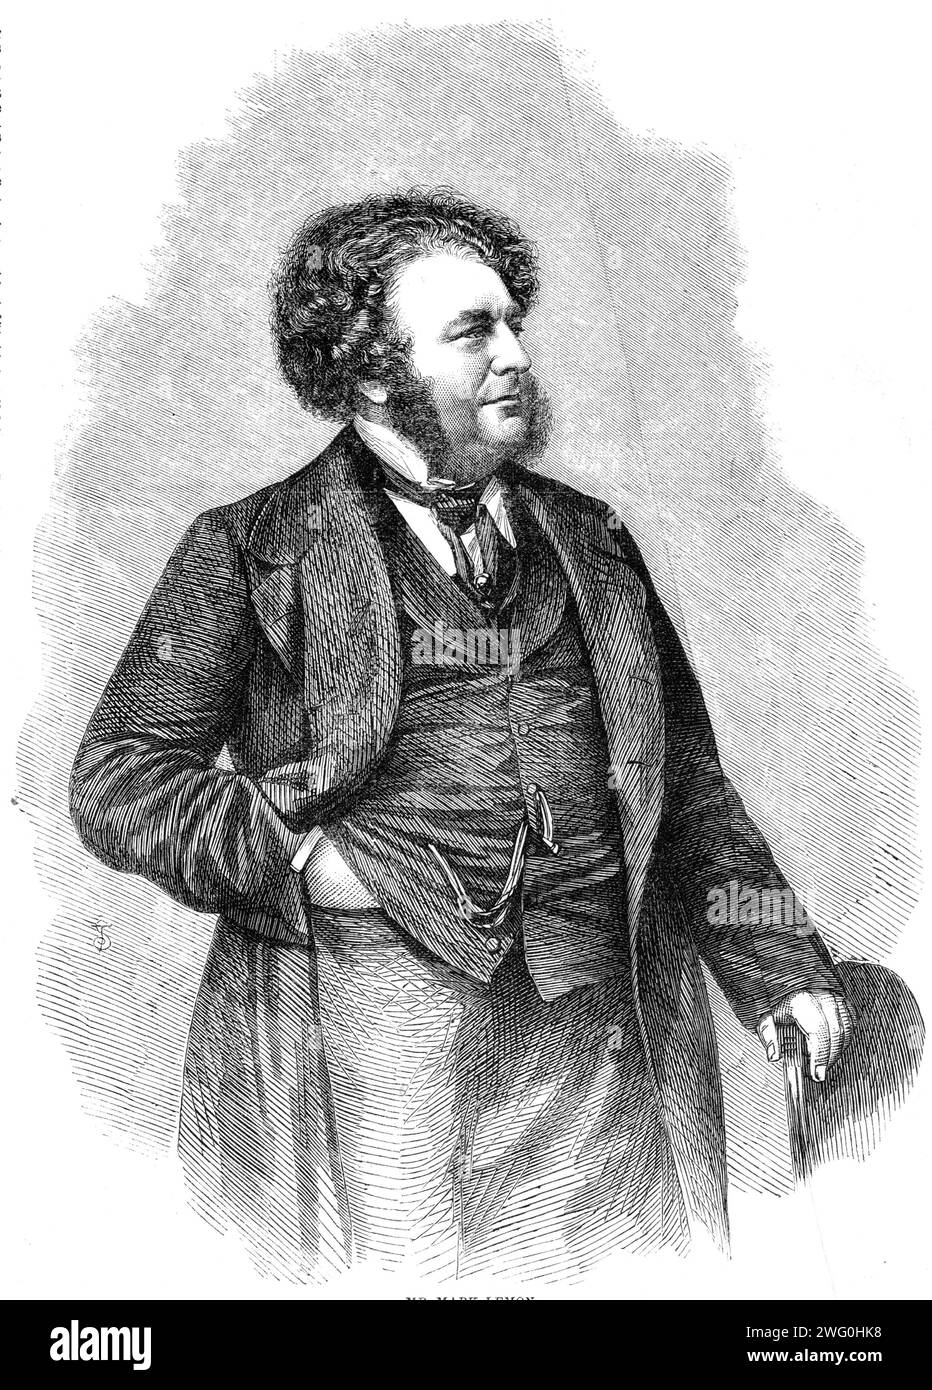 Mr. Mark Lemon, 1862. Engraving from a photograph by Mayall, of '...a writer of most pleasant dramas, mirthful farces, charming nouvellettes, and graceful lyrics...the director of Punch...[and lecturer]...He brings to his work the invaluable qualifications of a long intimacy with the public, and a perfect acquaintance with what it is fitting in a literary man to offer and good for an intelligent audience to receive; and he possesses, as what we may term the physical advantages of a lecturer, a fine voice and a cordial and popular manner. His topic is London, and probably a more elastic theme w Stock Photo